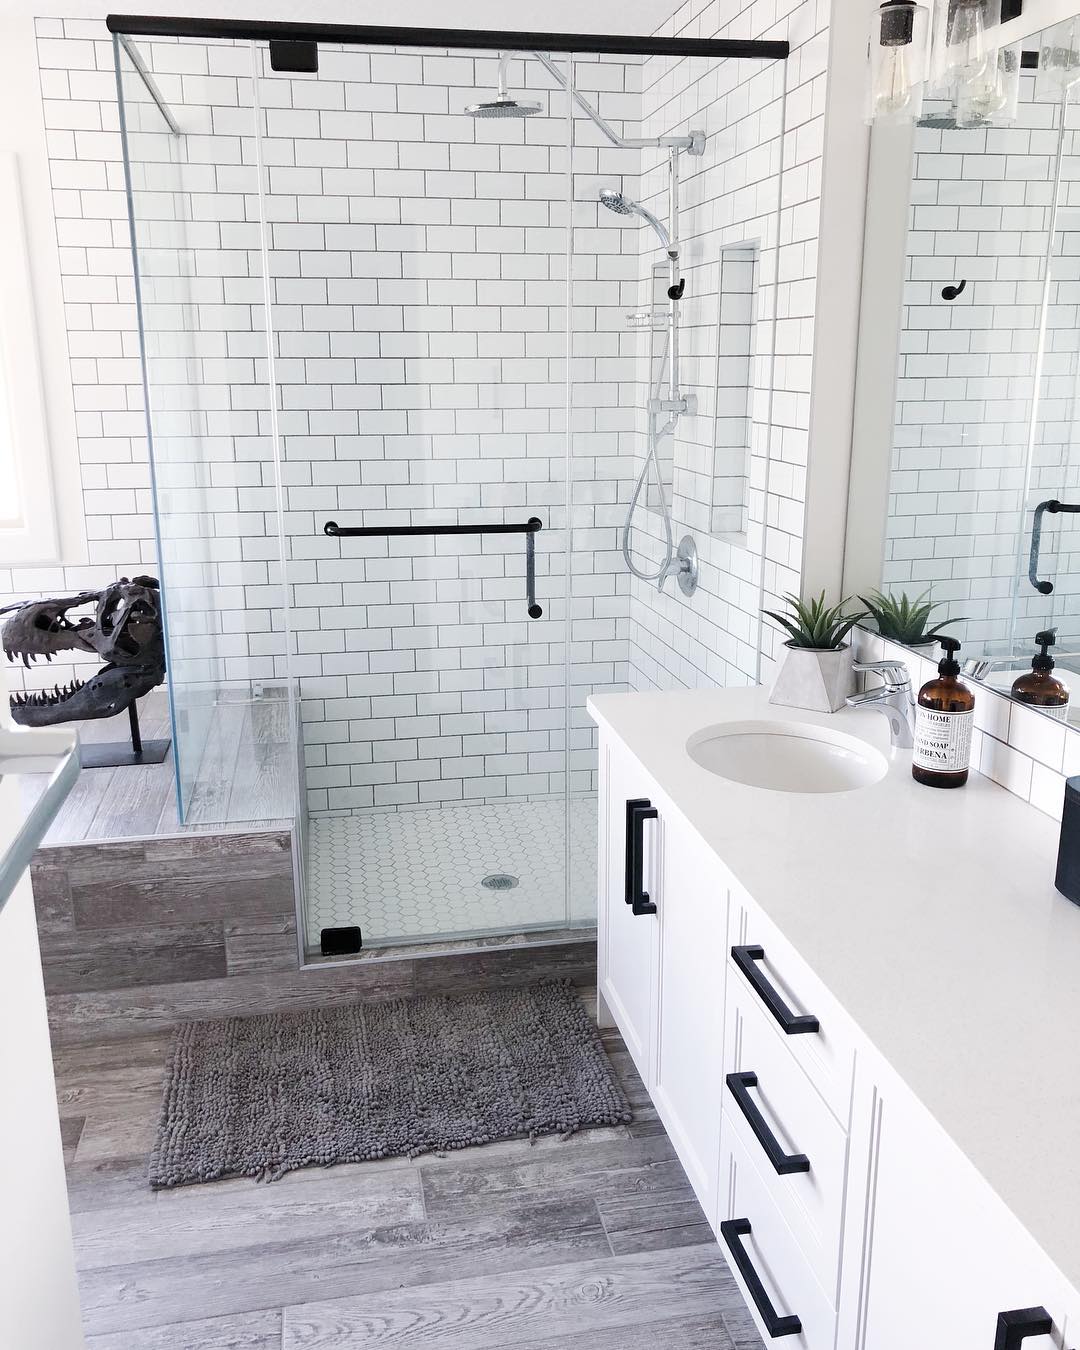 White-tile bathroom with wood floors and glass shower. Photo by Instagram user @kling_designs